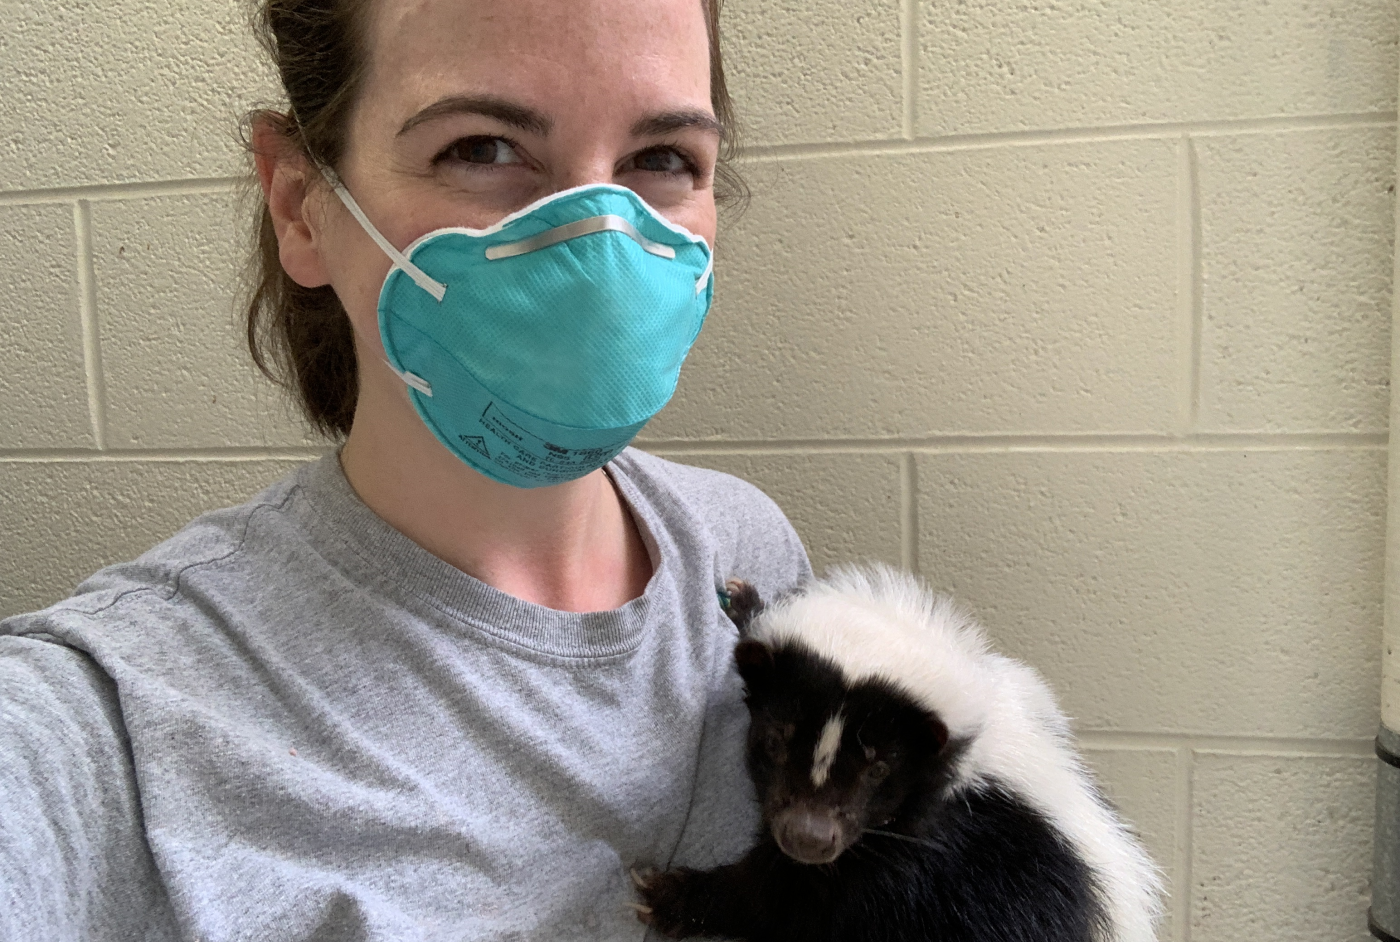 Animal Keeper Ann Gutowski holds a skunk on her chest. Ann is wearing a gray T-shirt and a blue mask. The skunk is looks toward the camera and is holding onto Ann's shirt, making the shirt bunch slightly under its paws.